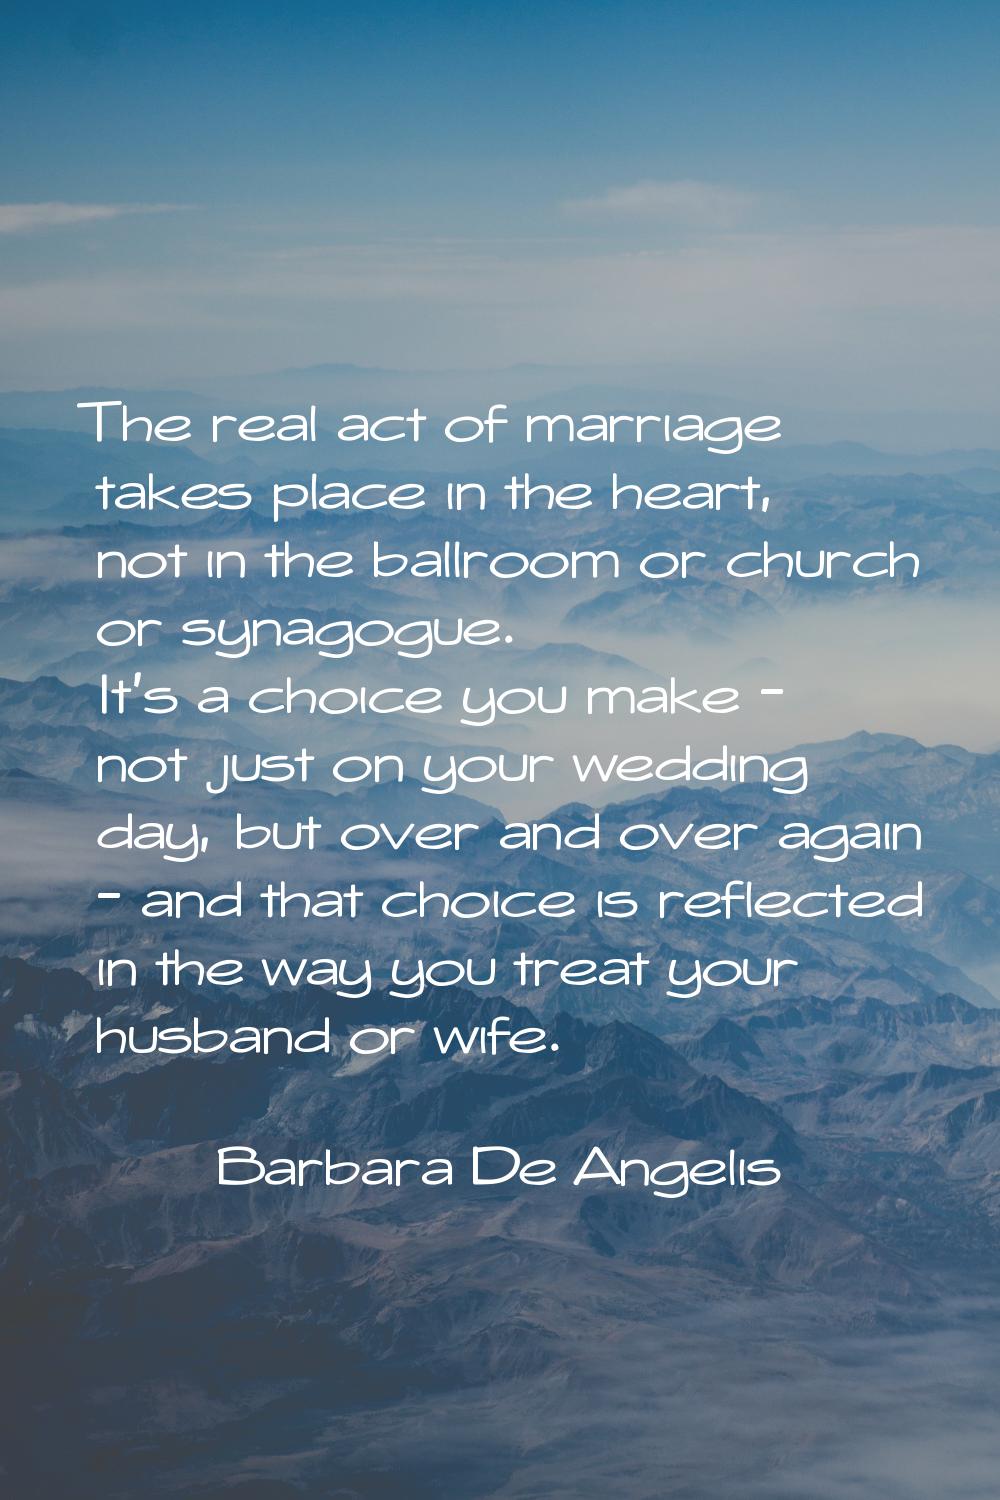 The real act of marriage takes place in the heart, not in the ballroom or church or synagogue. It's